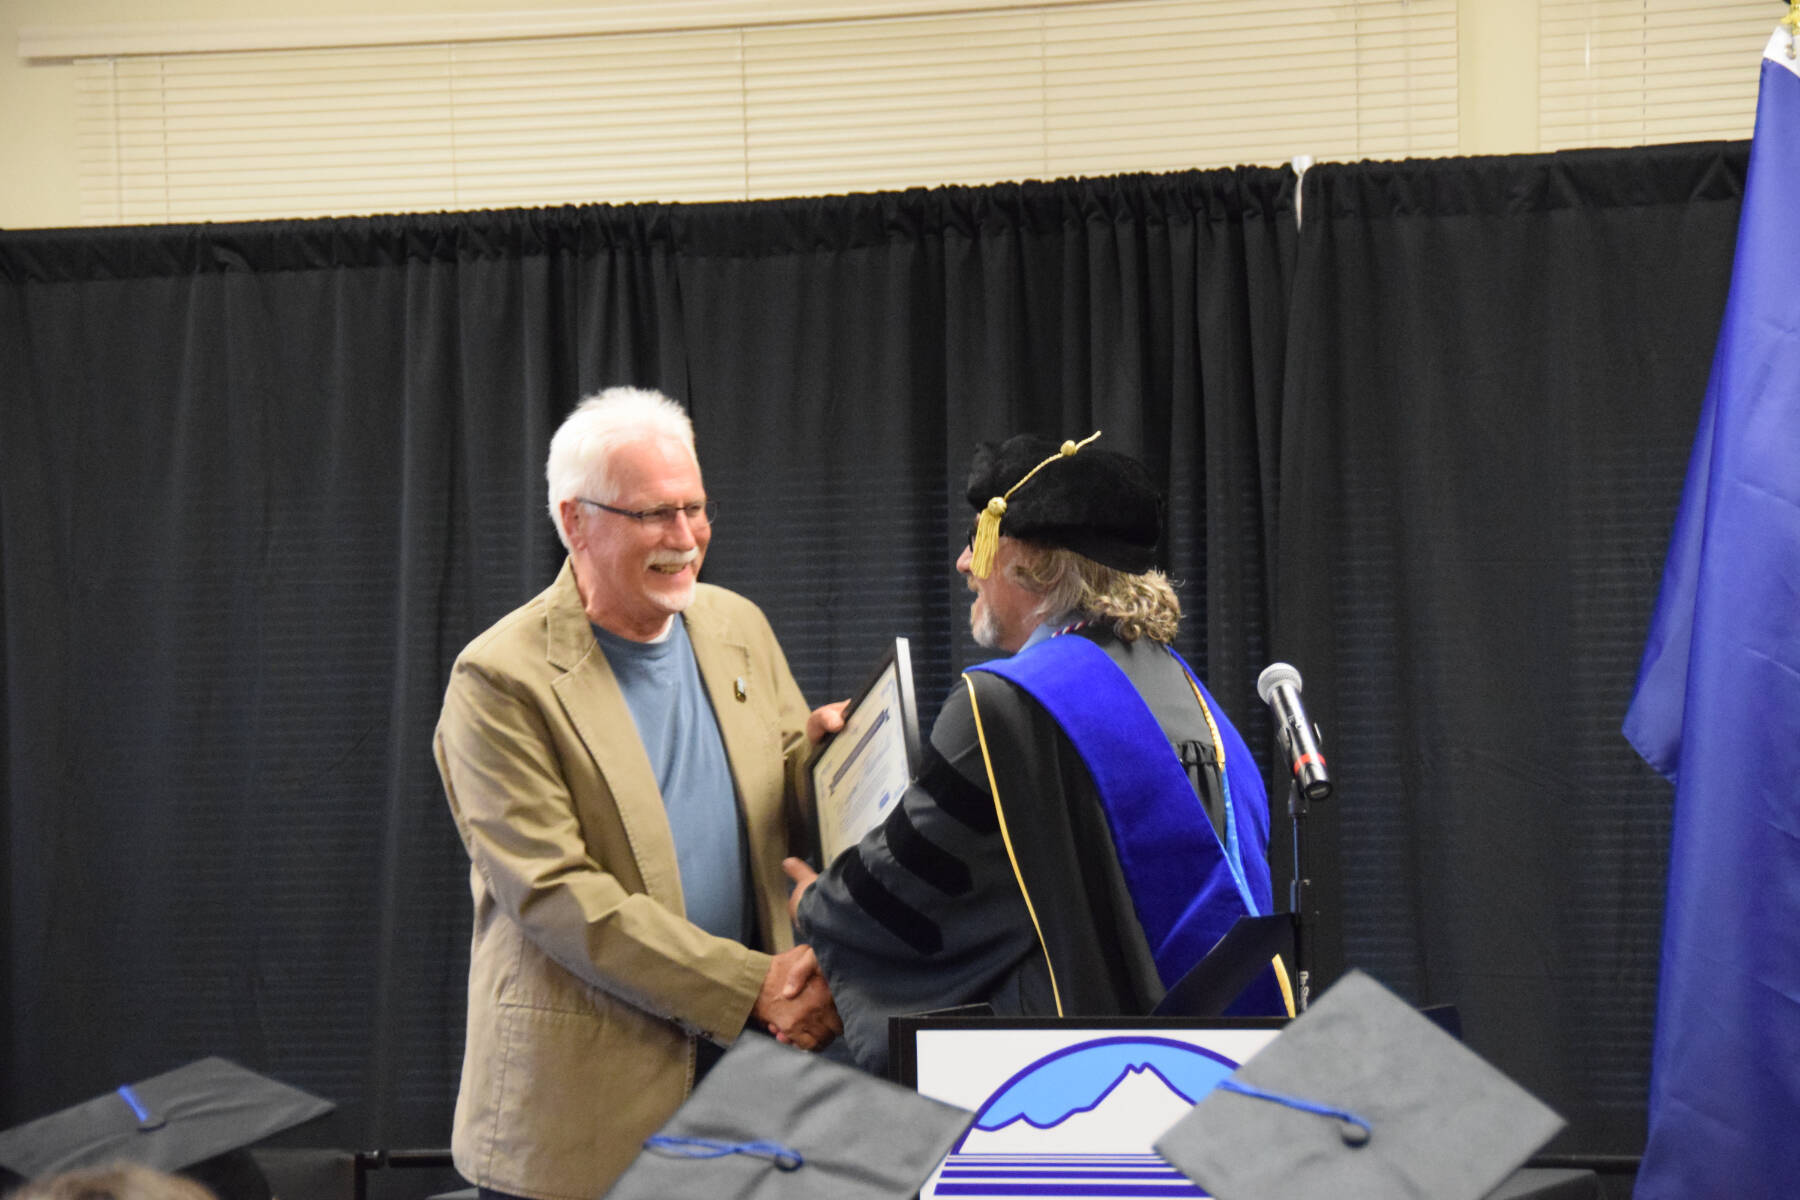 Kachemak Bay Campus Director Dr. Reid Brewer (right) presents the KBC Director’s Choice award to KBC advisory board member and student Wayne Aderhold (right) during the 2023 KBC Commencement on Wednesday, May 10, 2023, in Homer, Alaska. (Photo by Delcenia Cosman/Homer News)